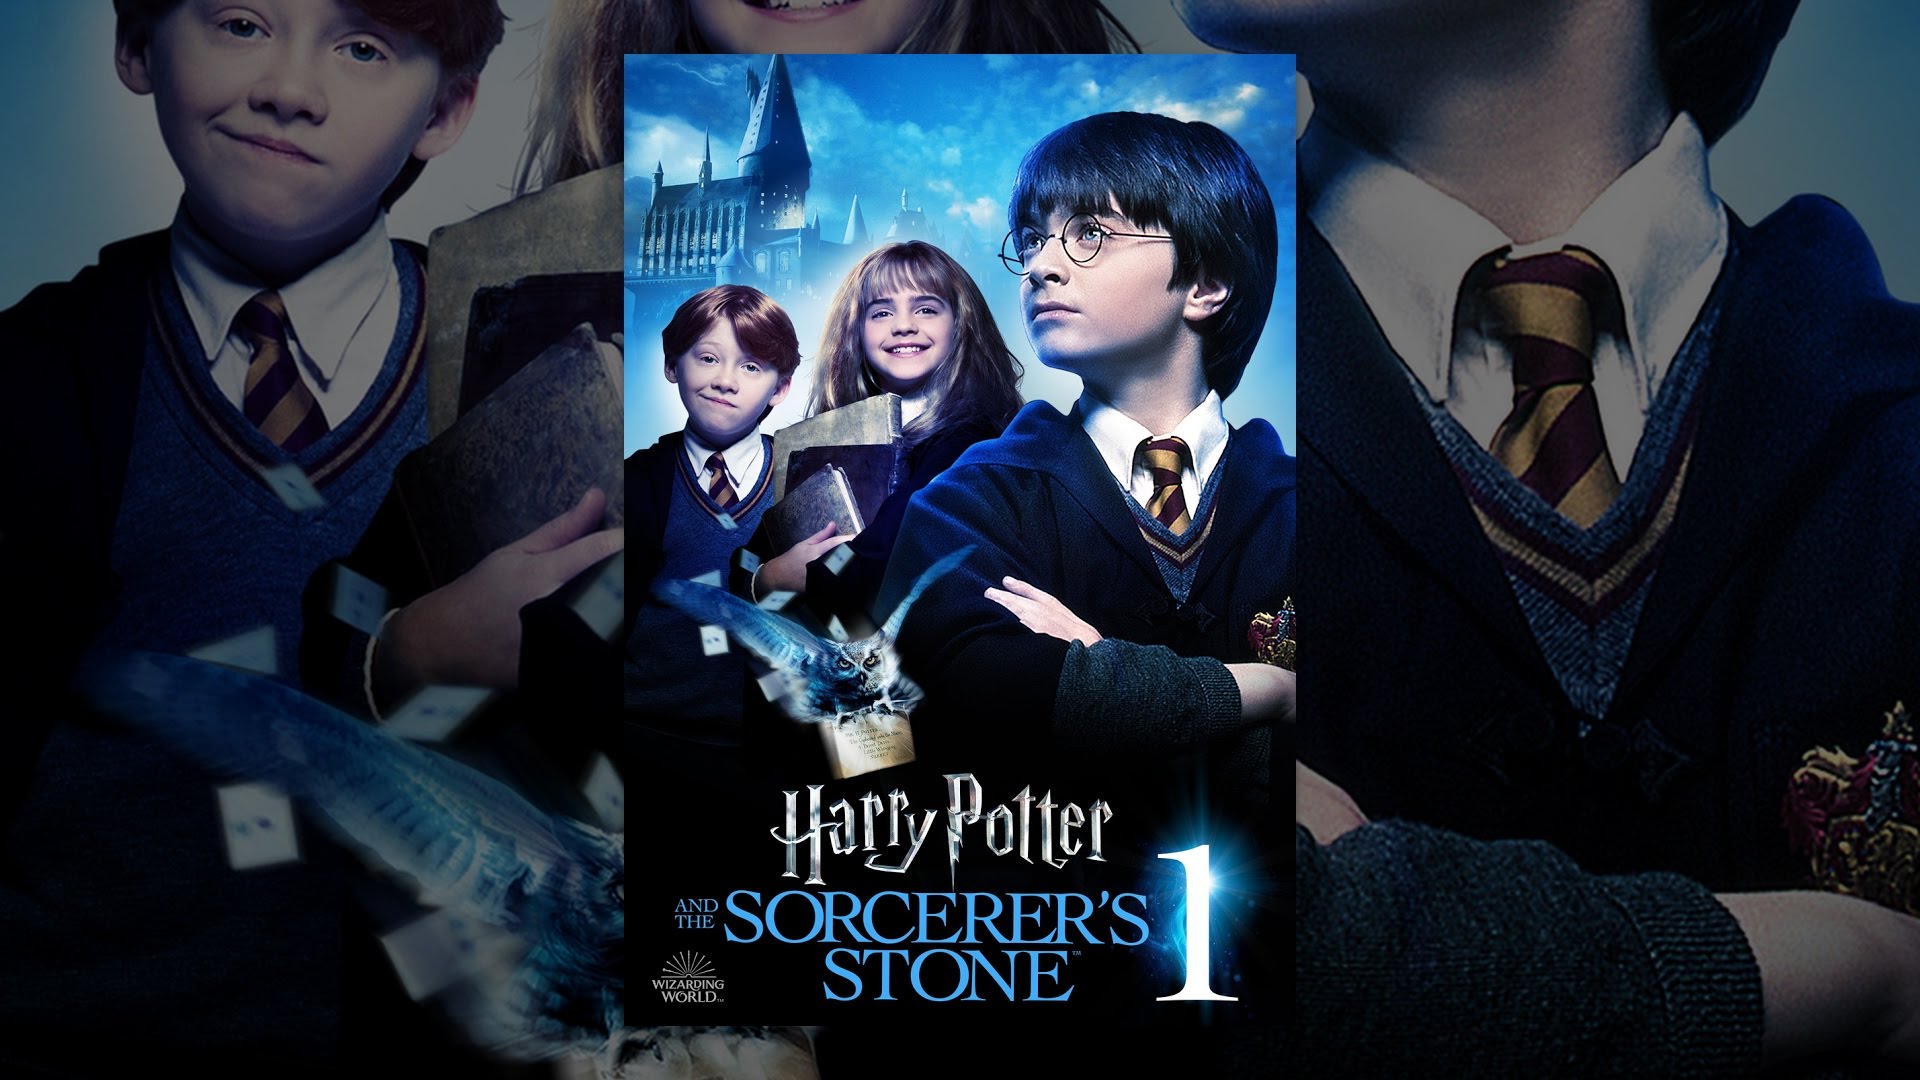 Are the Harry Potter movies available on YouTube? 2